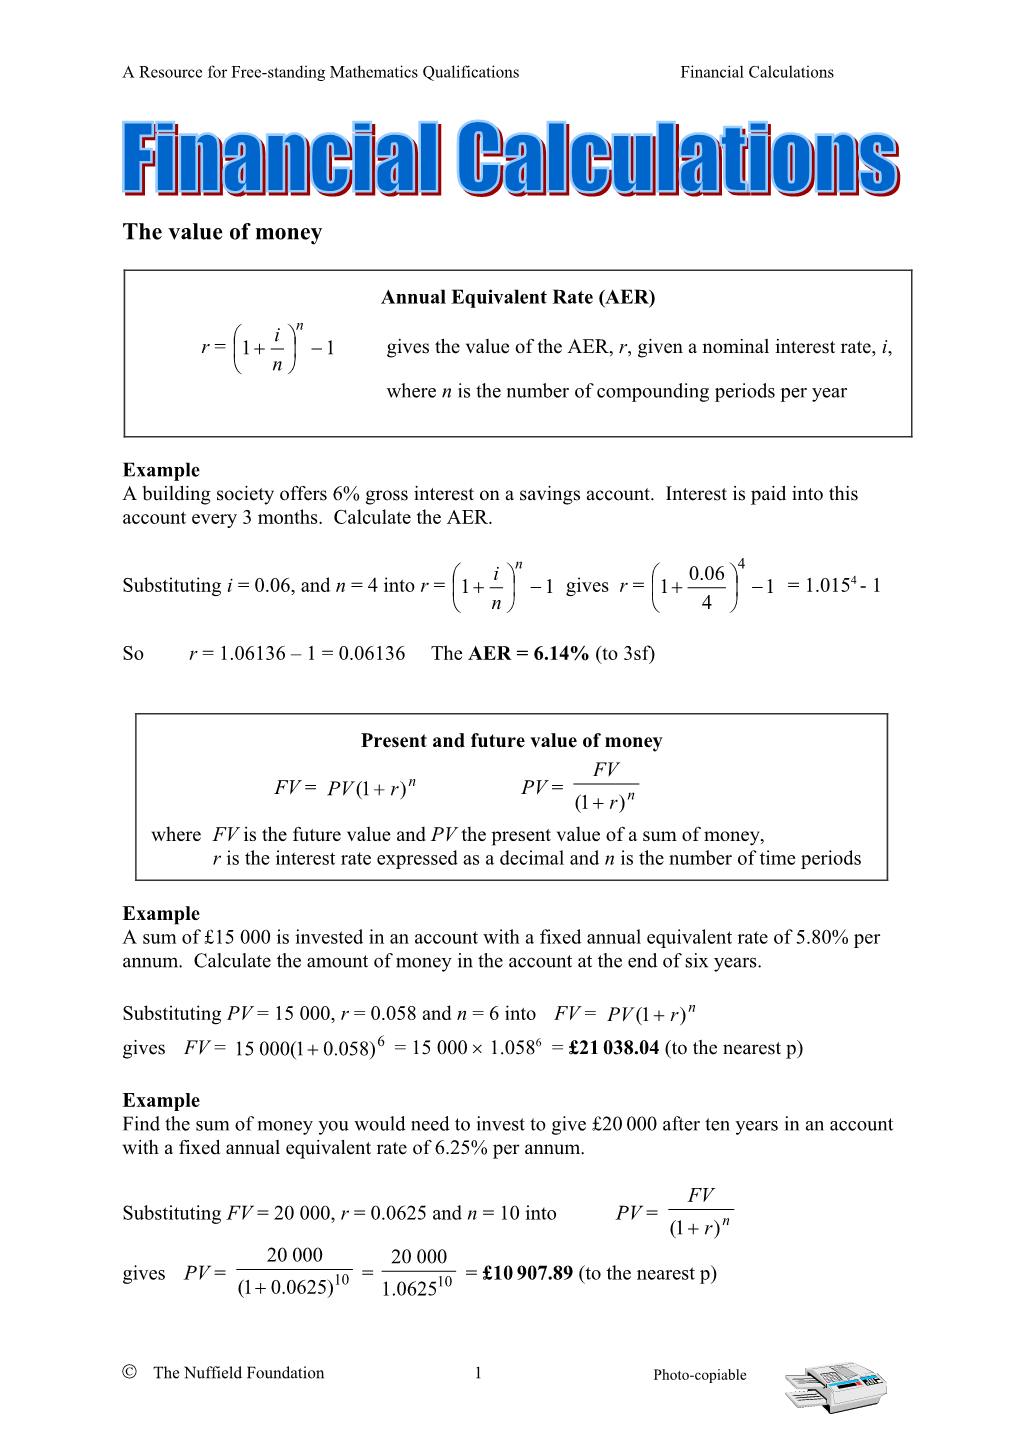 A Resource for Free-Standing Mathematics Qualificationsfinancial Calculations